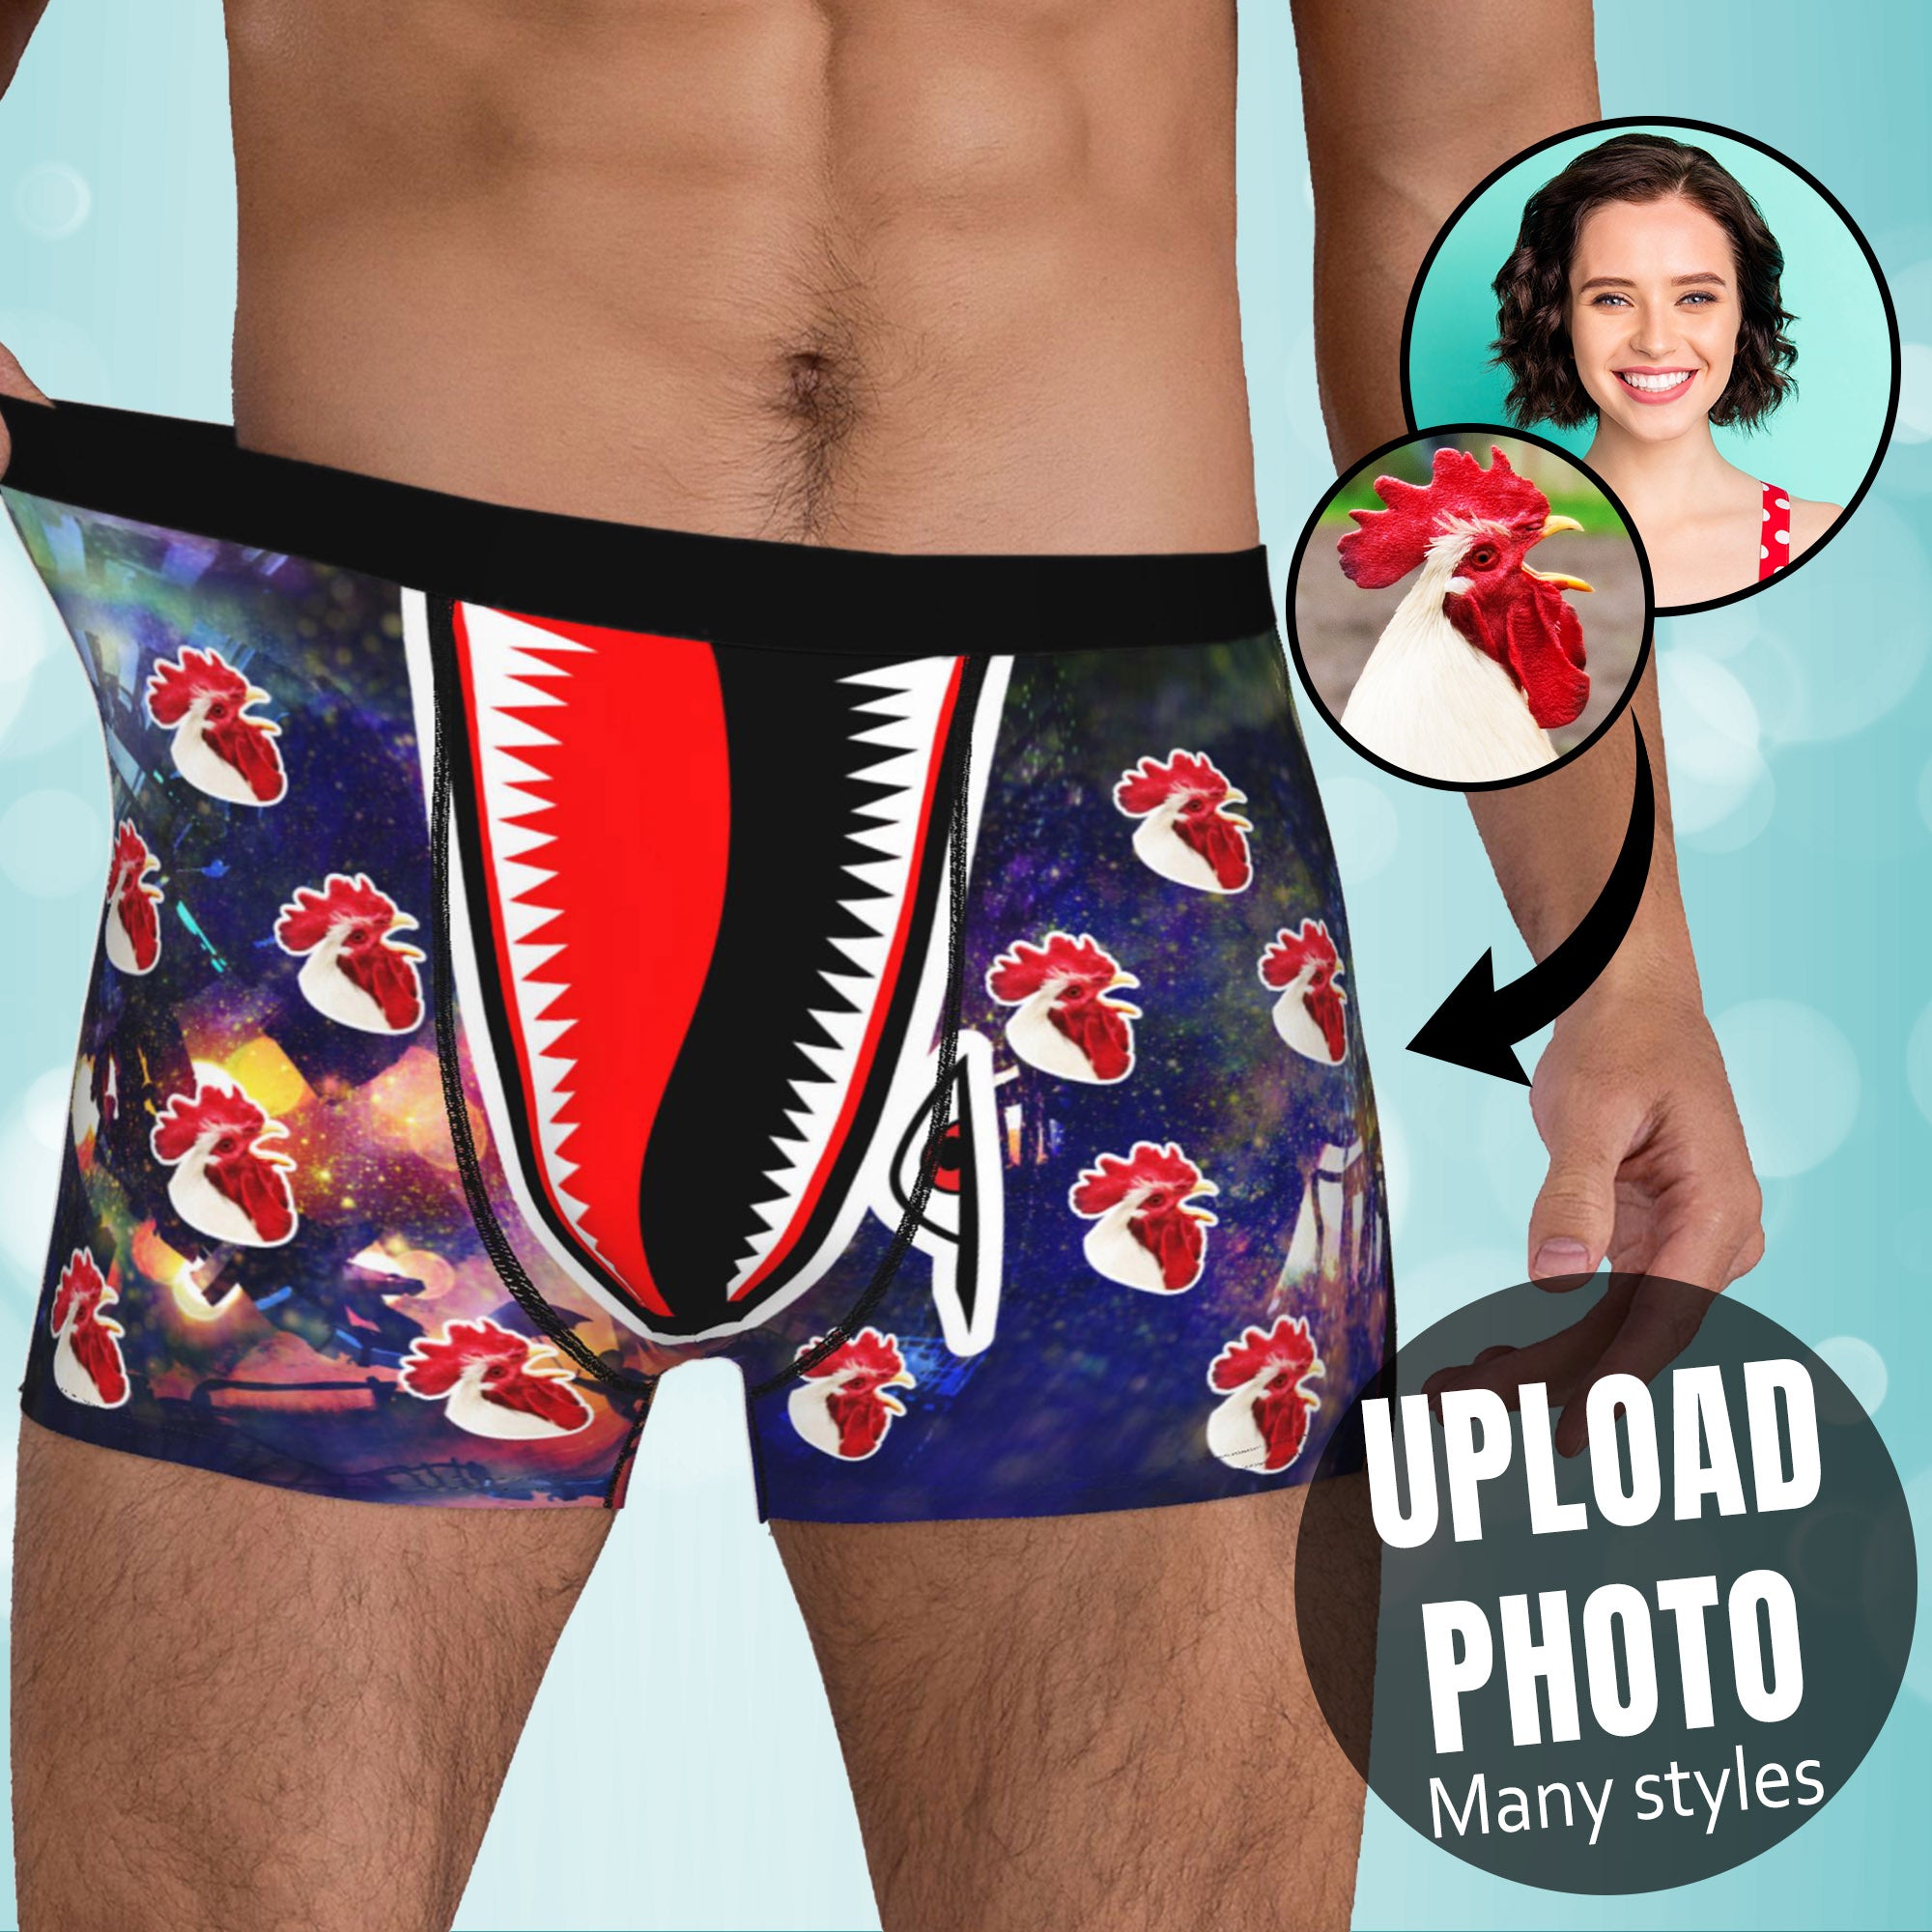 Custom Boxers for Men with Faces Customized Underwear for Men Personal –  Zenzzle